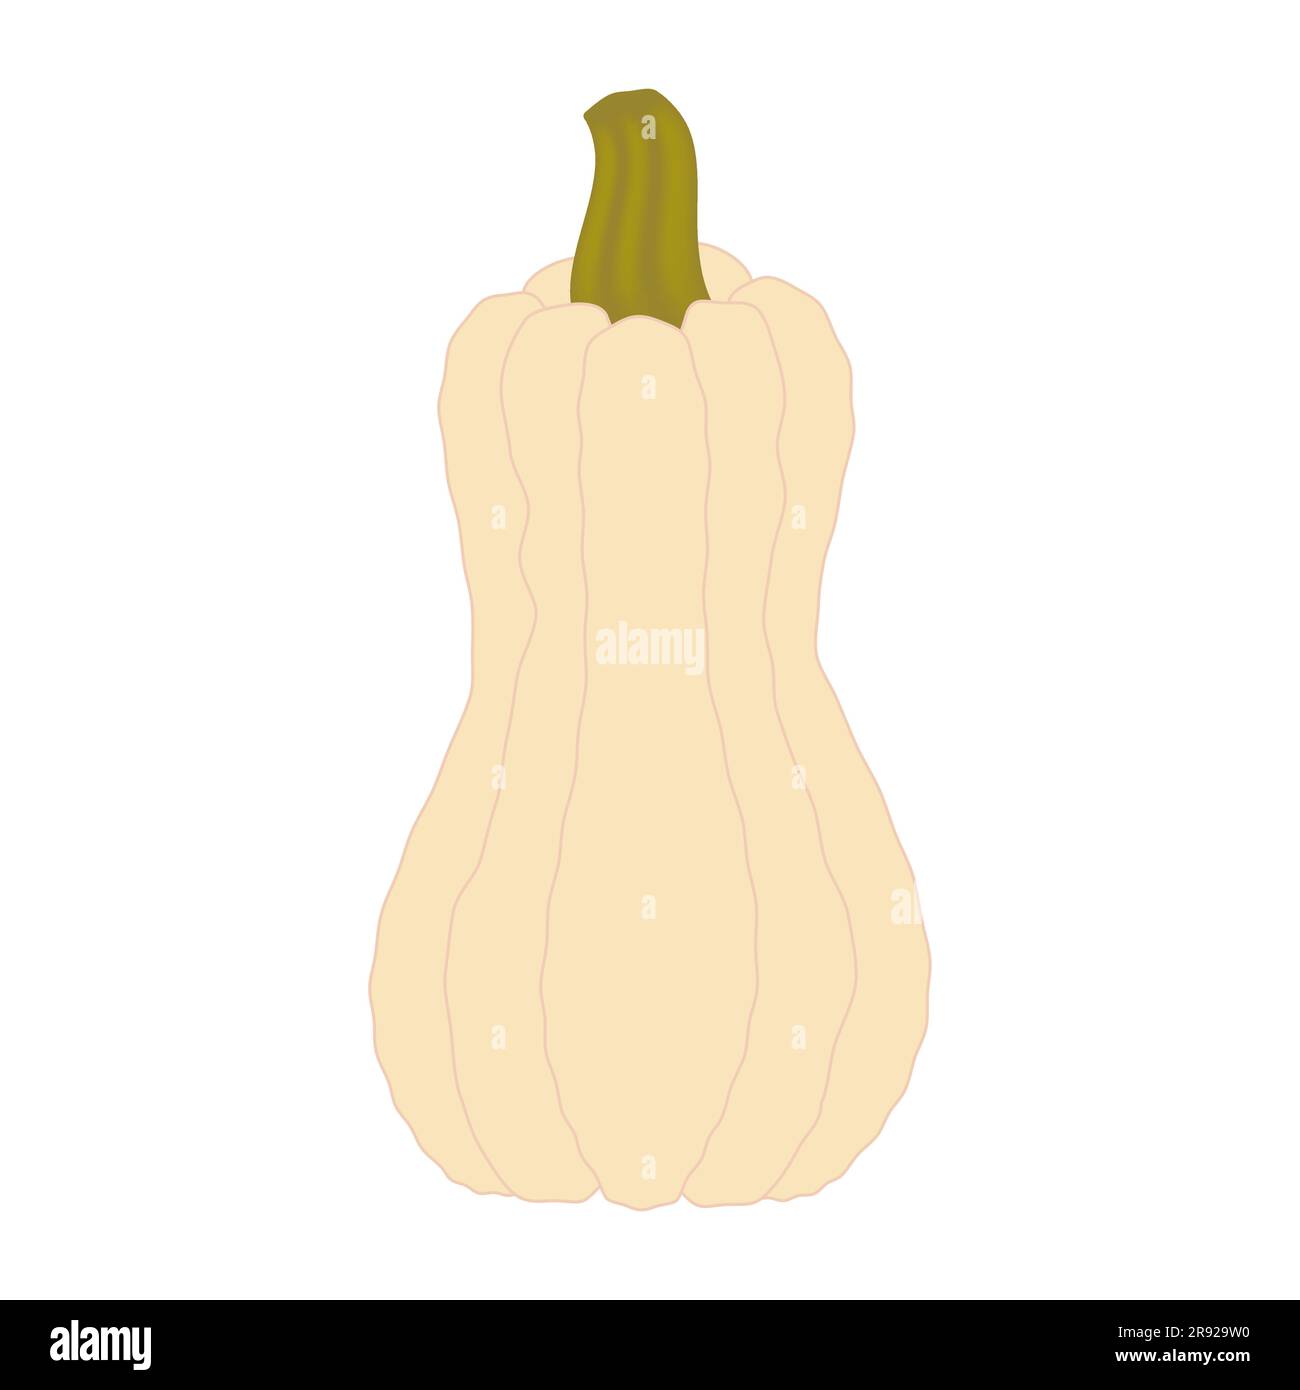 Pumpkin Design element Gourd illustration for Halloween and Thanksgiving Day Farm product Vector illustration Isolated on white background Stock Vector